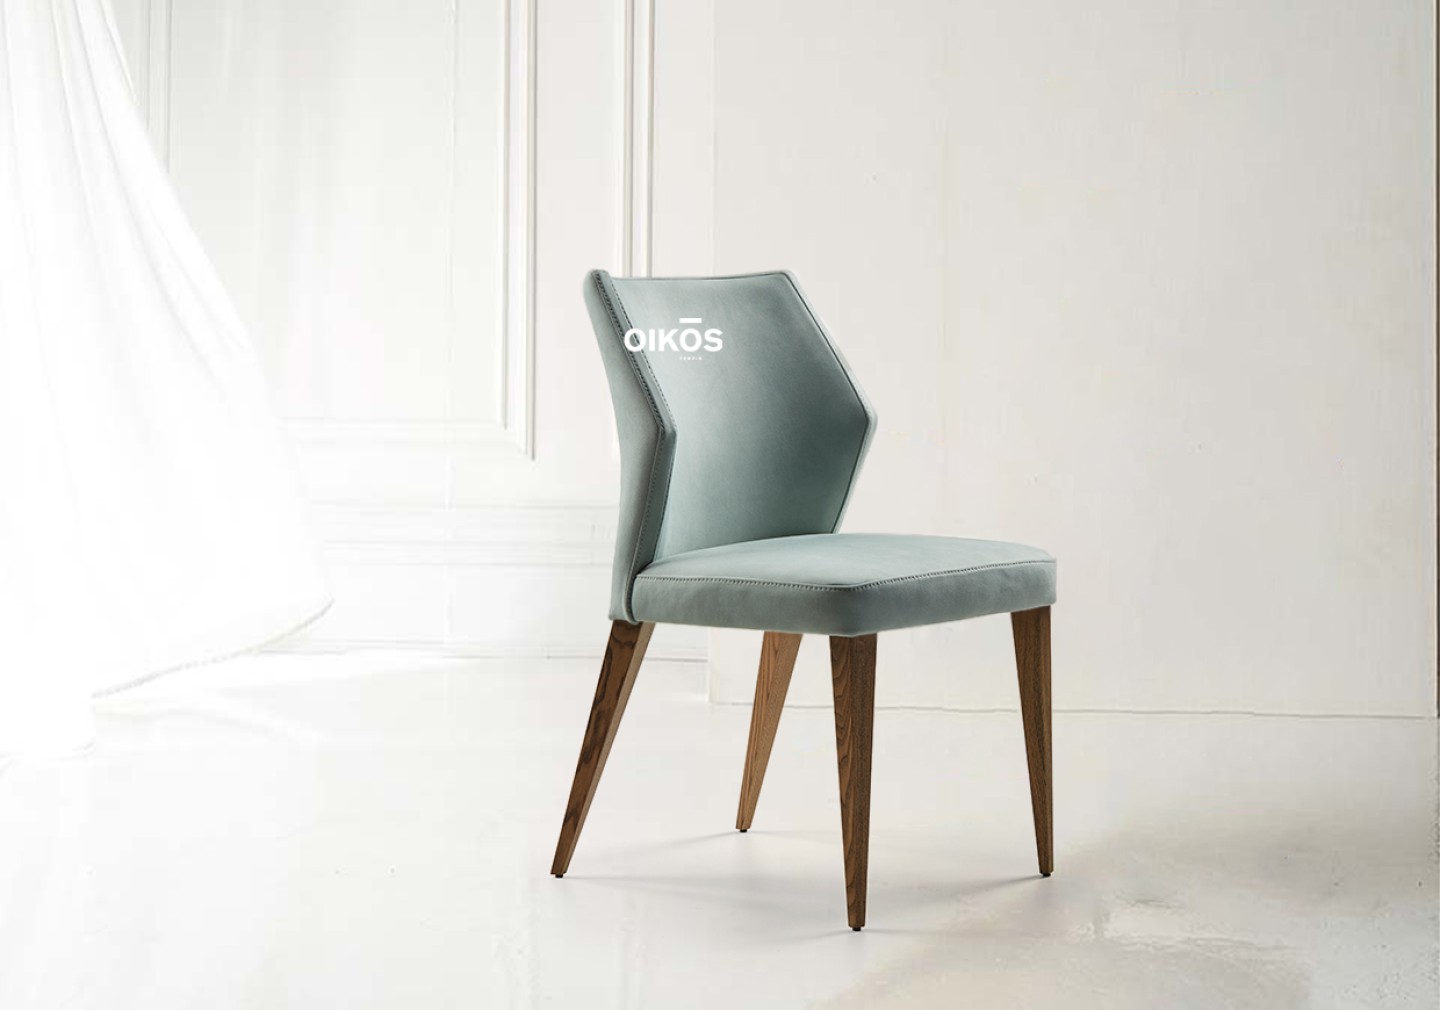 THE GISELE DINING CHAIR